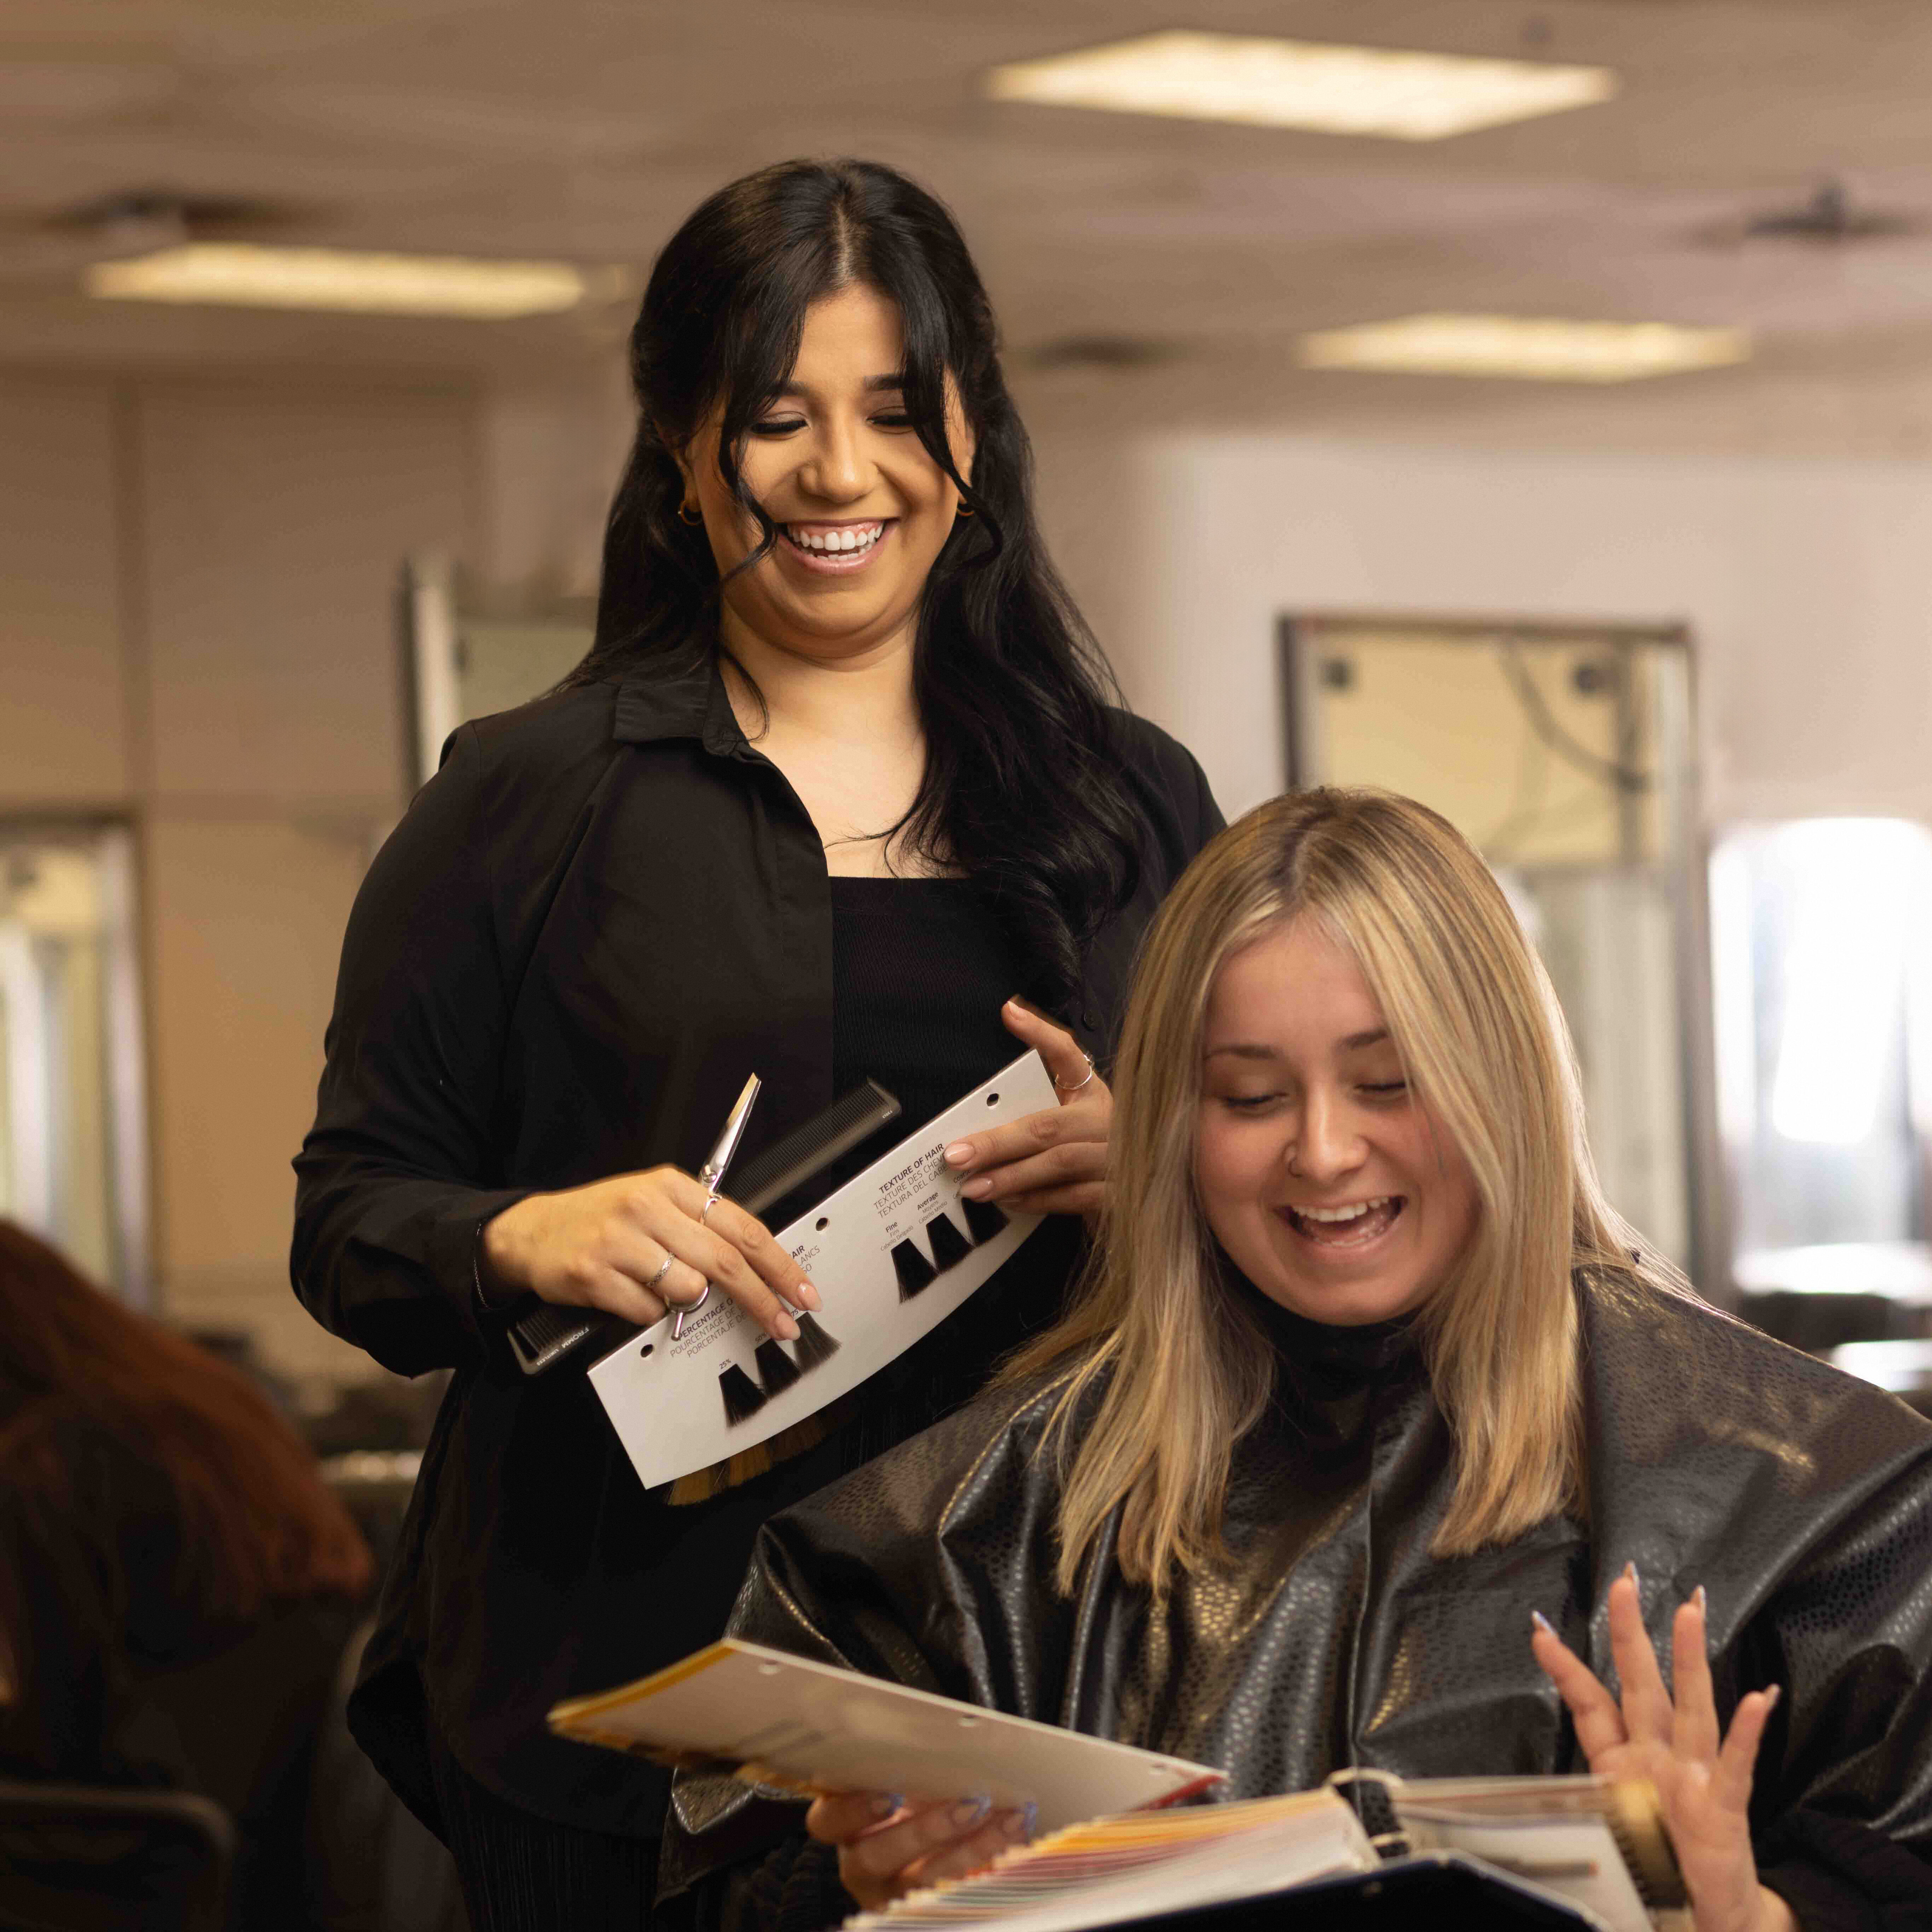 Cosmetology school student in a cosmetology training program applying hair color to a client